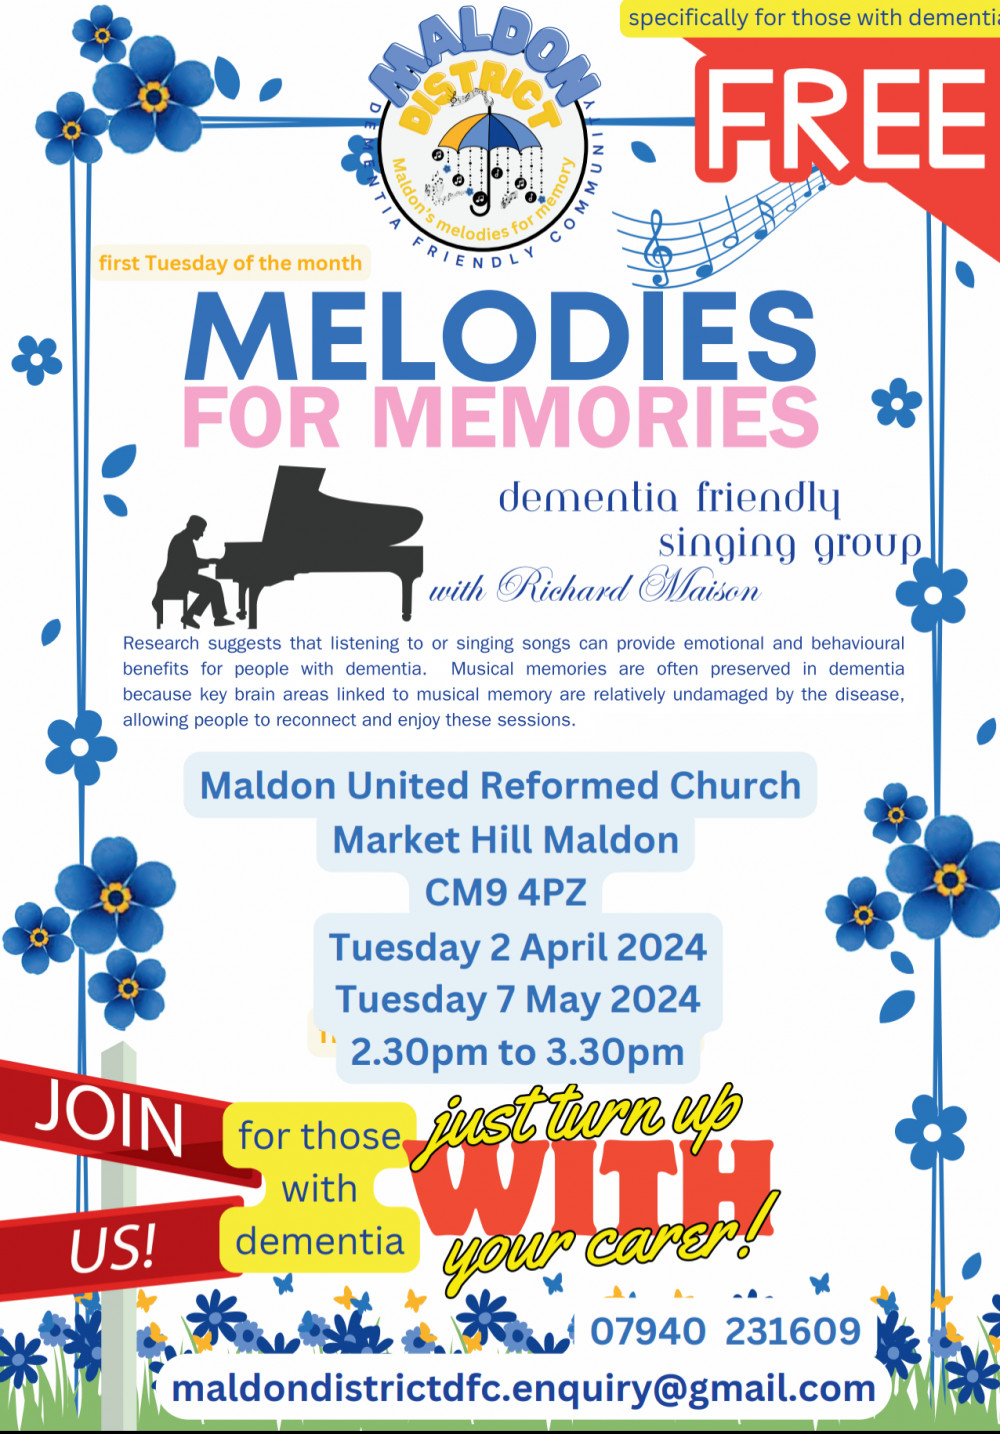 "Melodies for Memories" dementia friendly singing Group